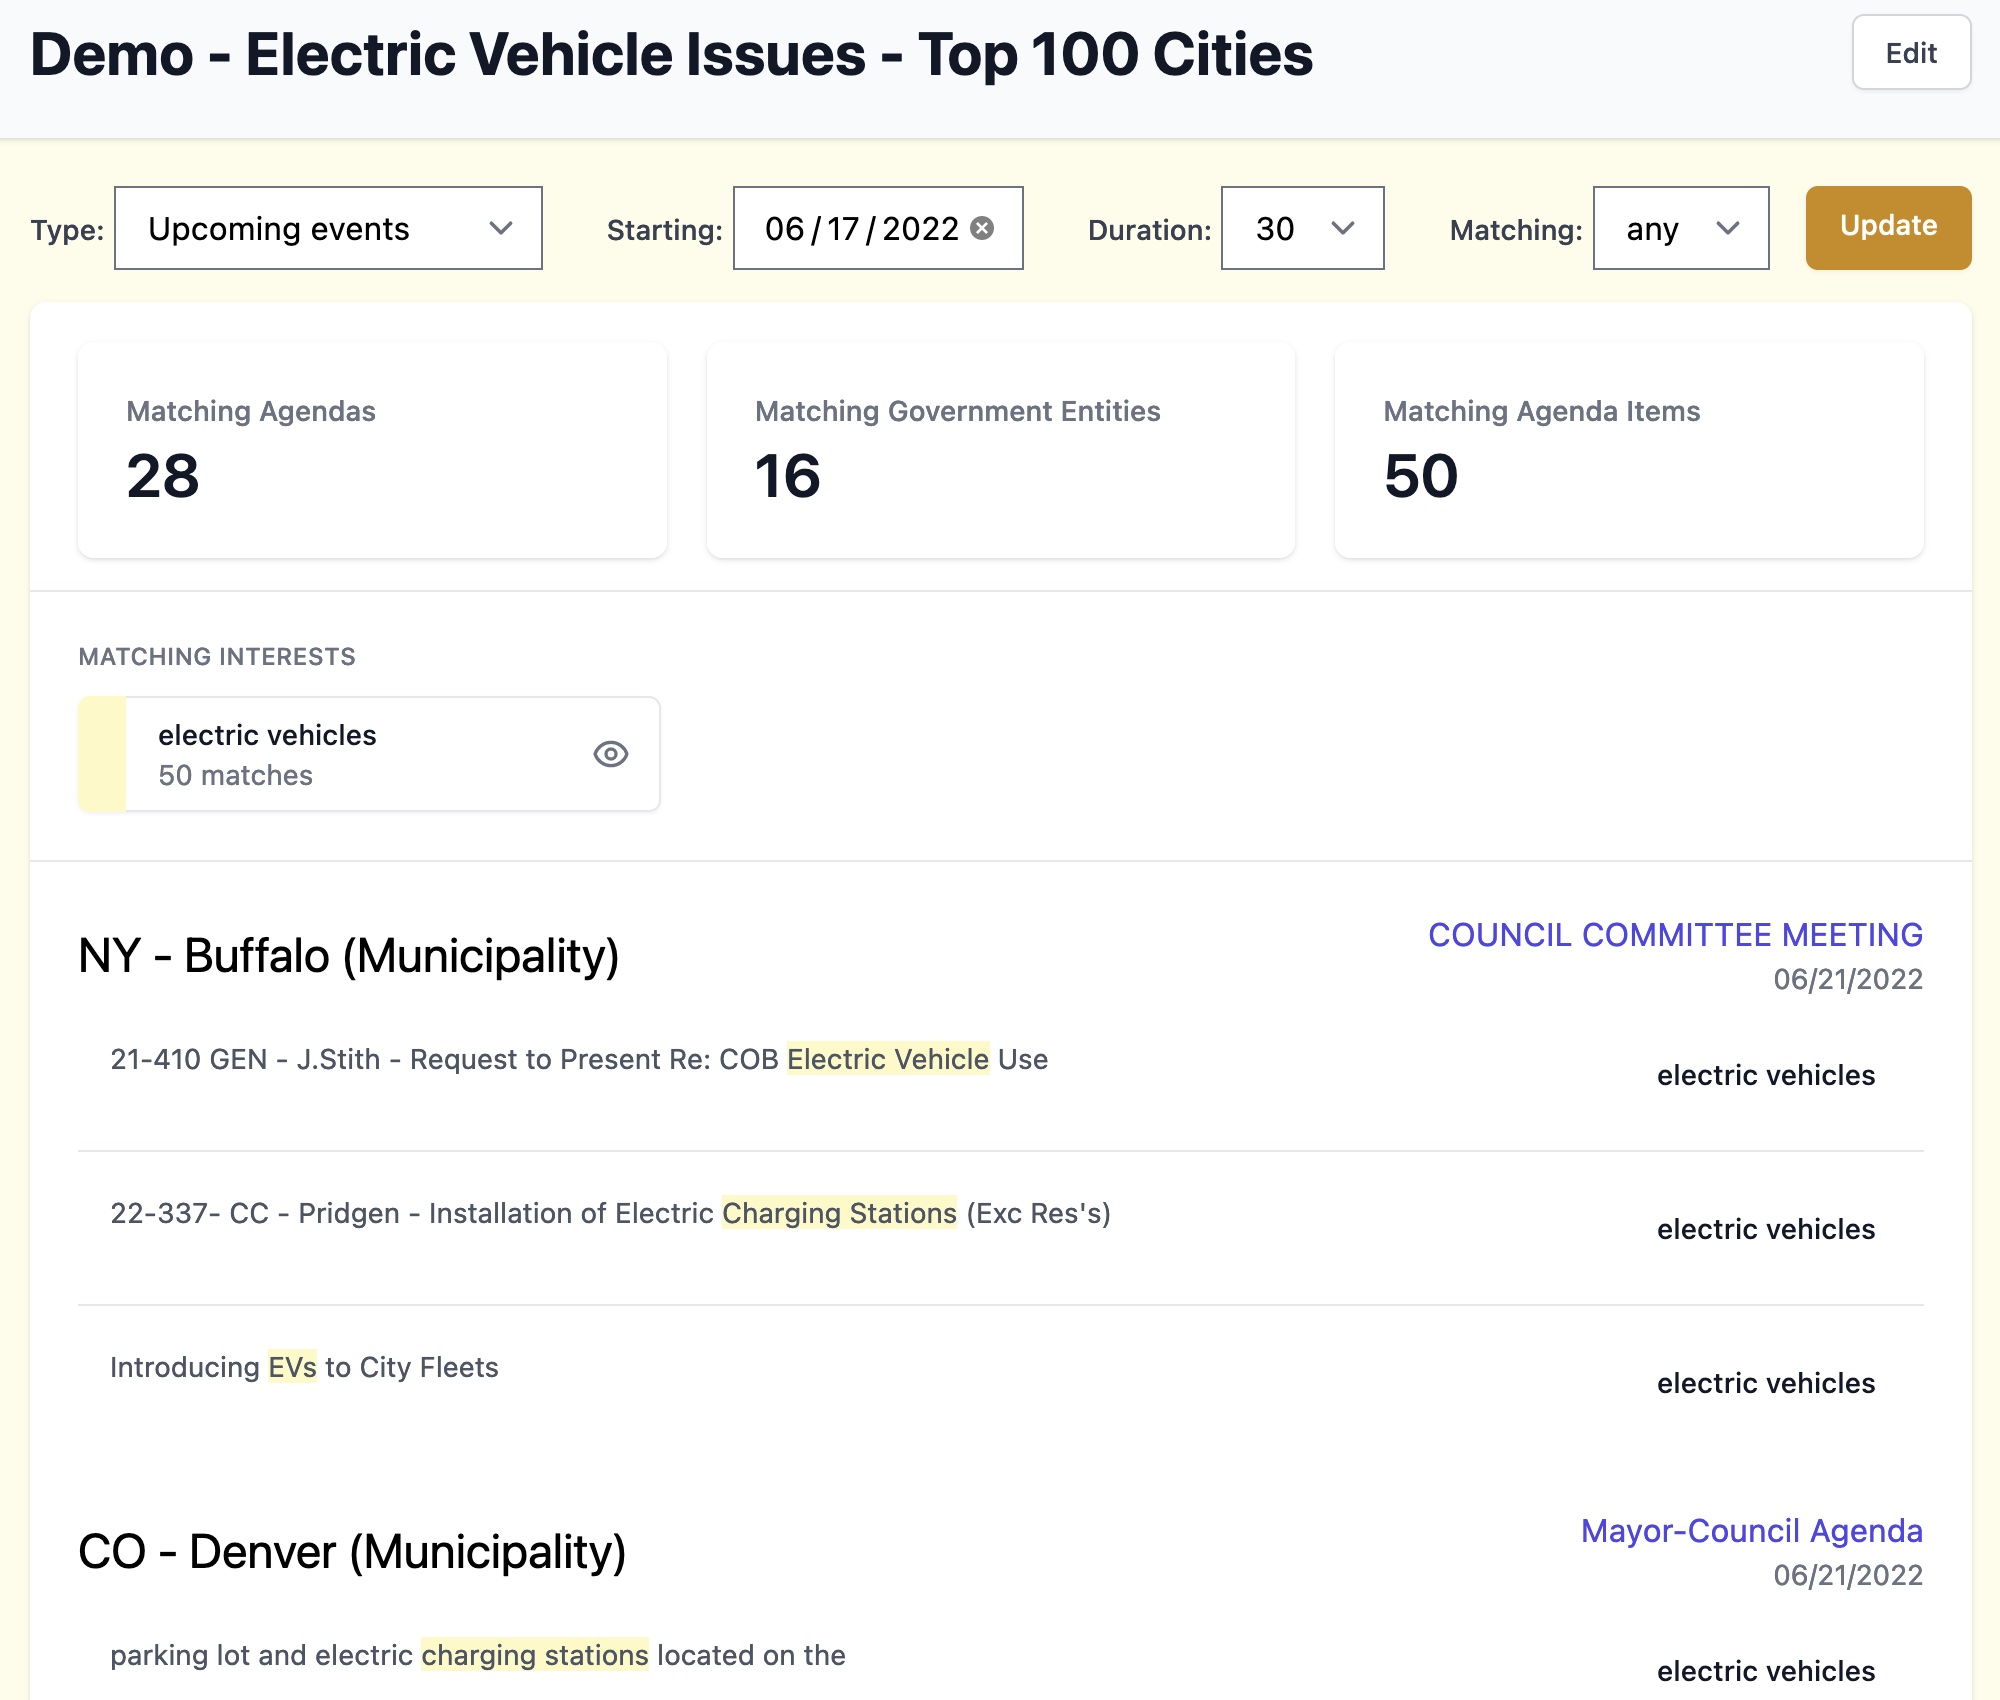 Screenshot showing a custom local government monitoring report for electric vehicle issues